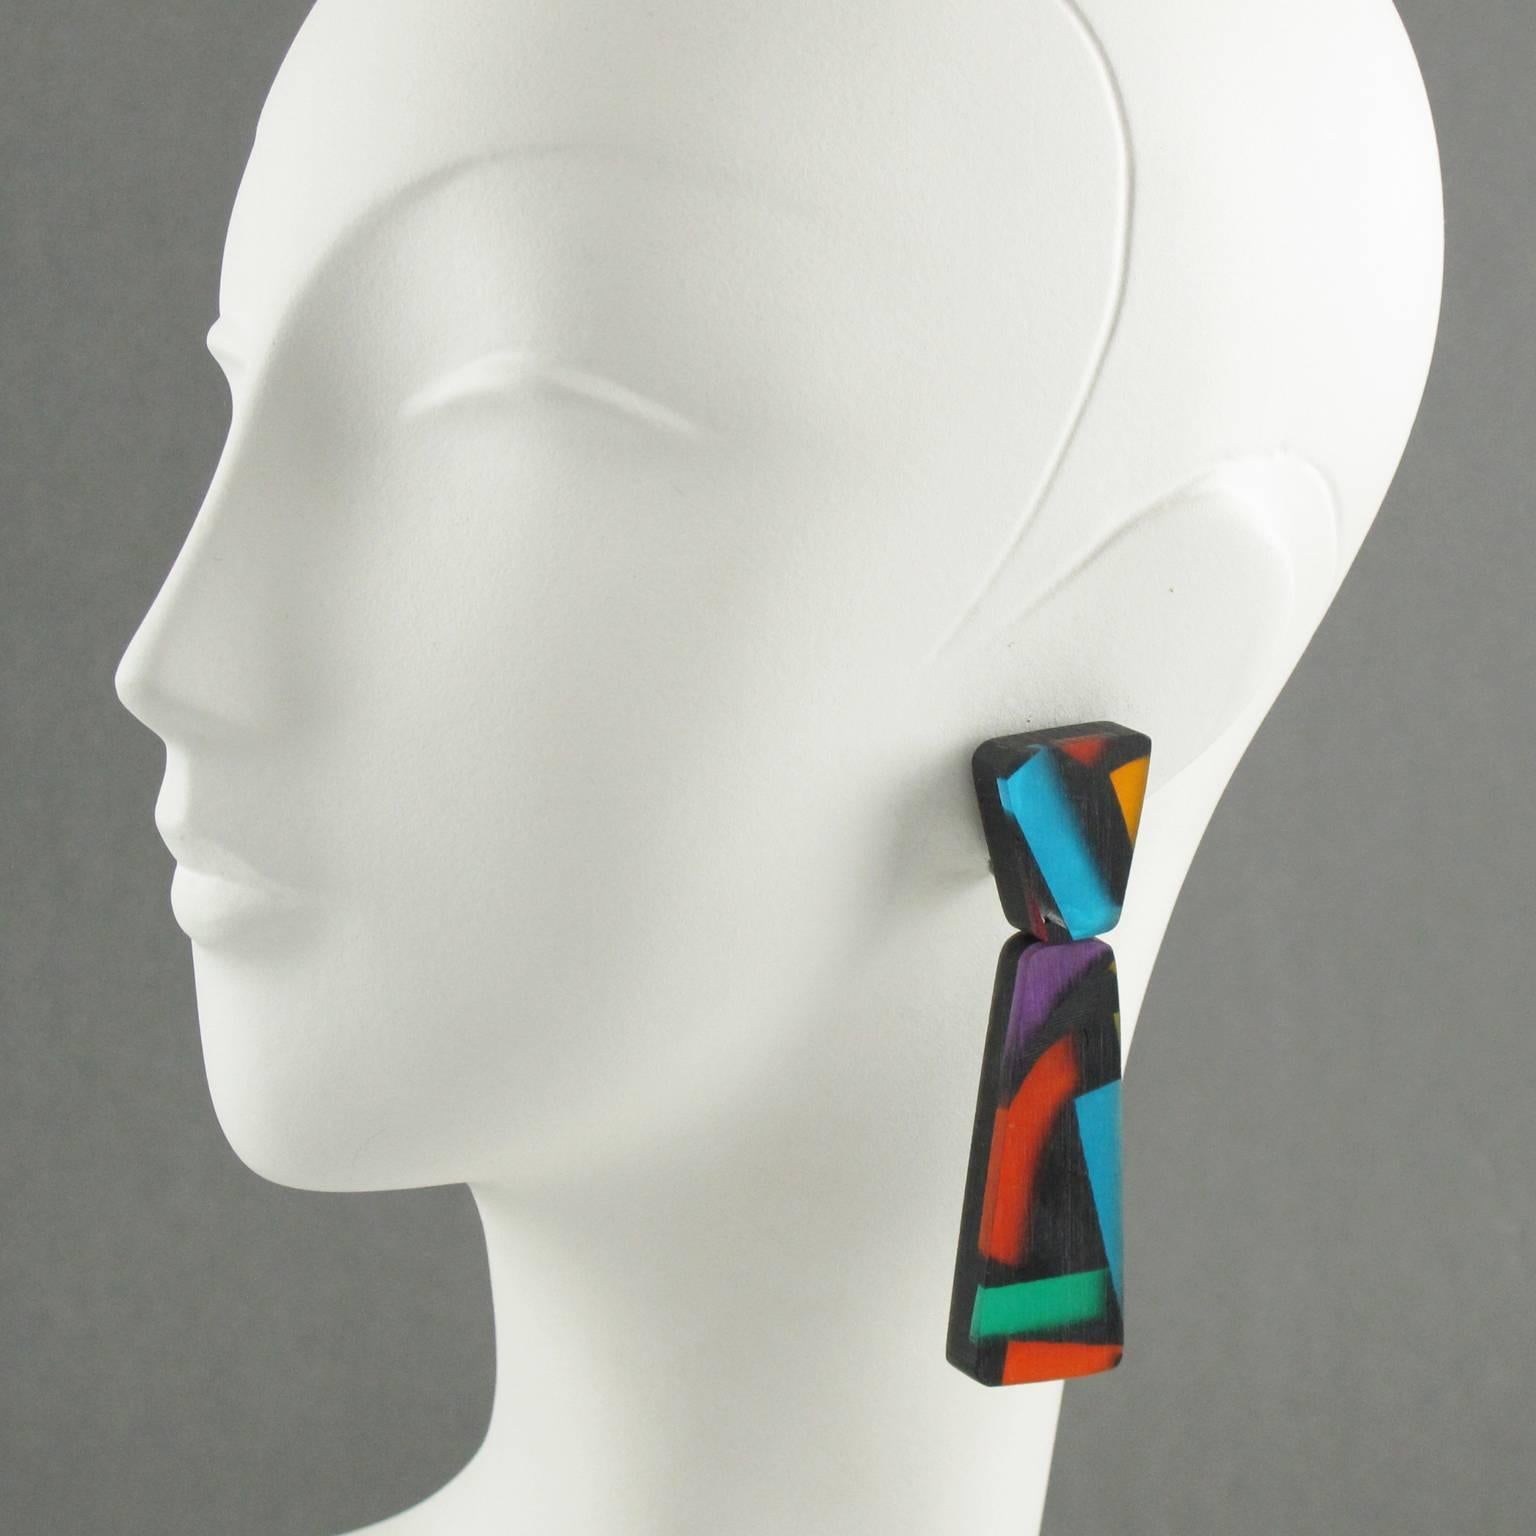 Spectacular and colorful oversized Lucite chandelier clip on earrings designed by Harriet Bauknight for Kaso. Large dangling shape with geometric design featuring dimensional multilayers black lucite with colorful harlequin pearlized inclusions.